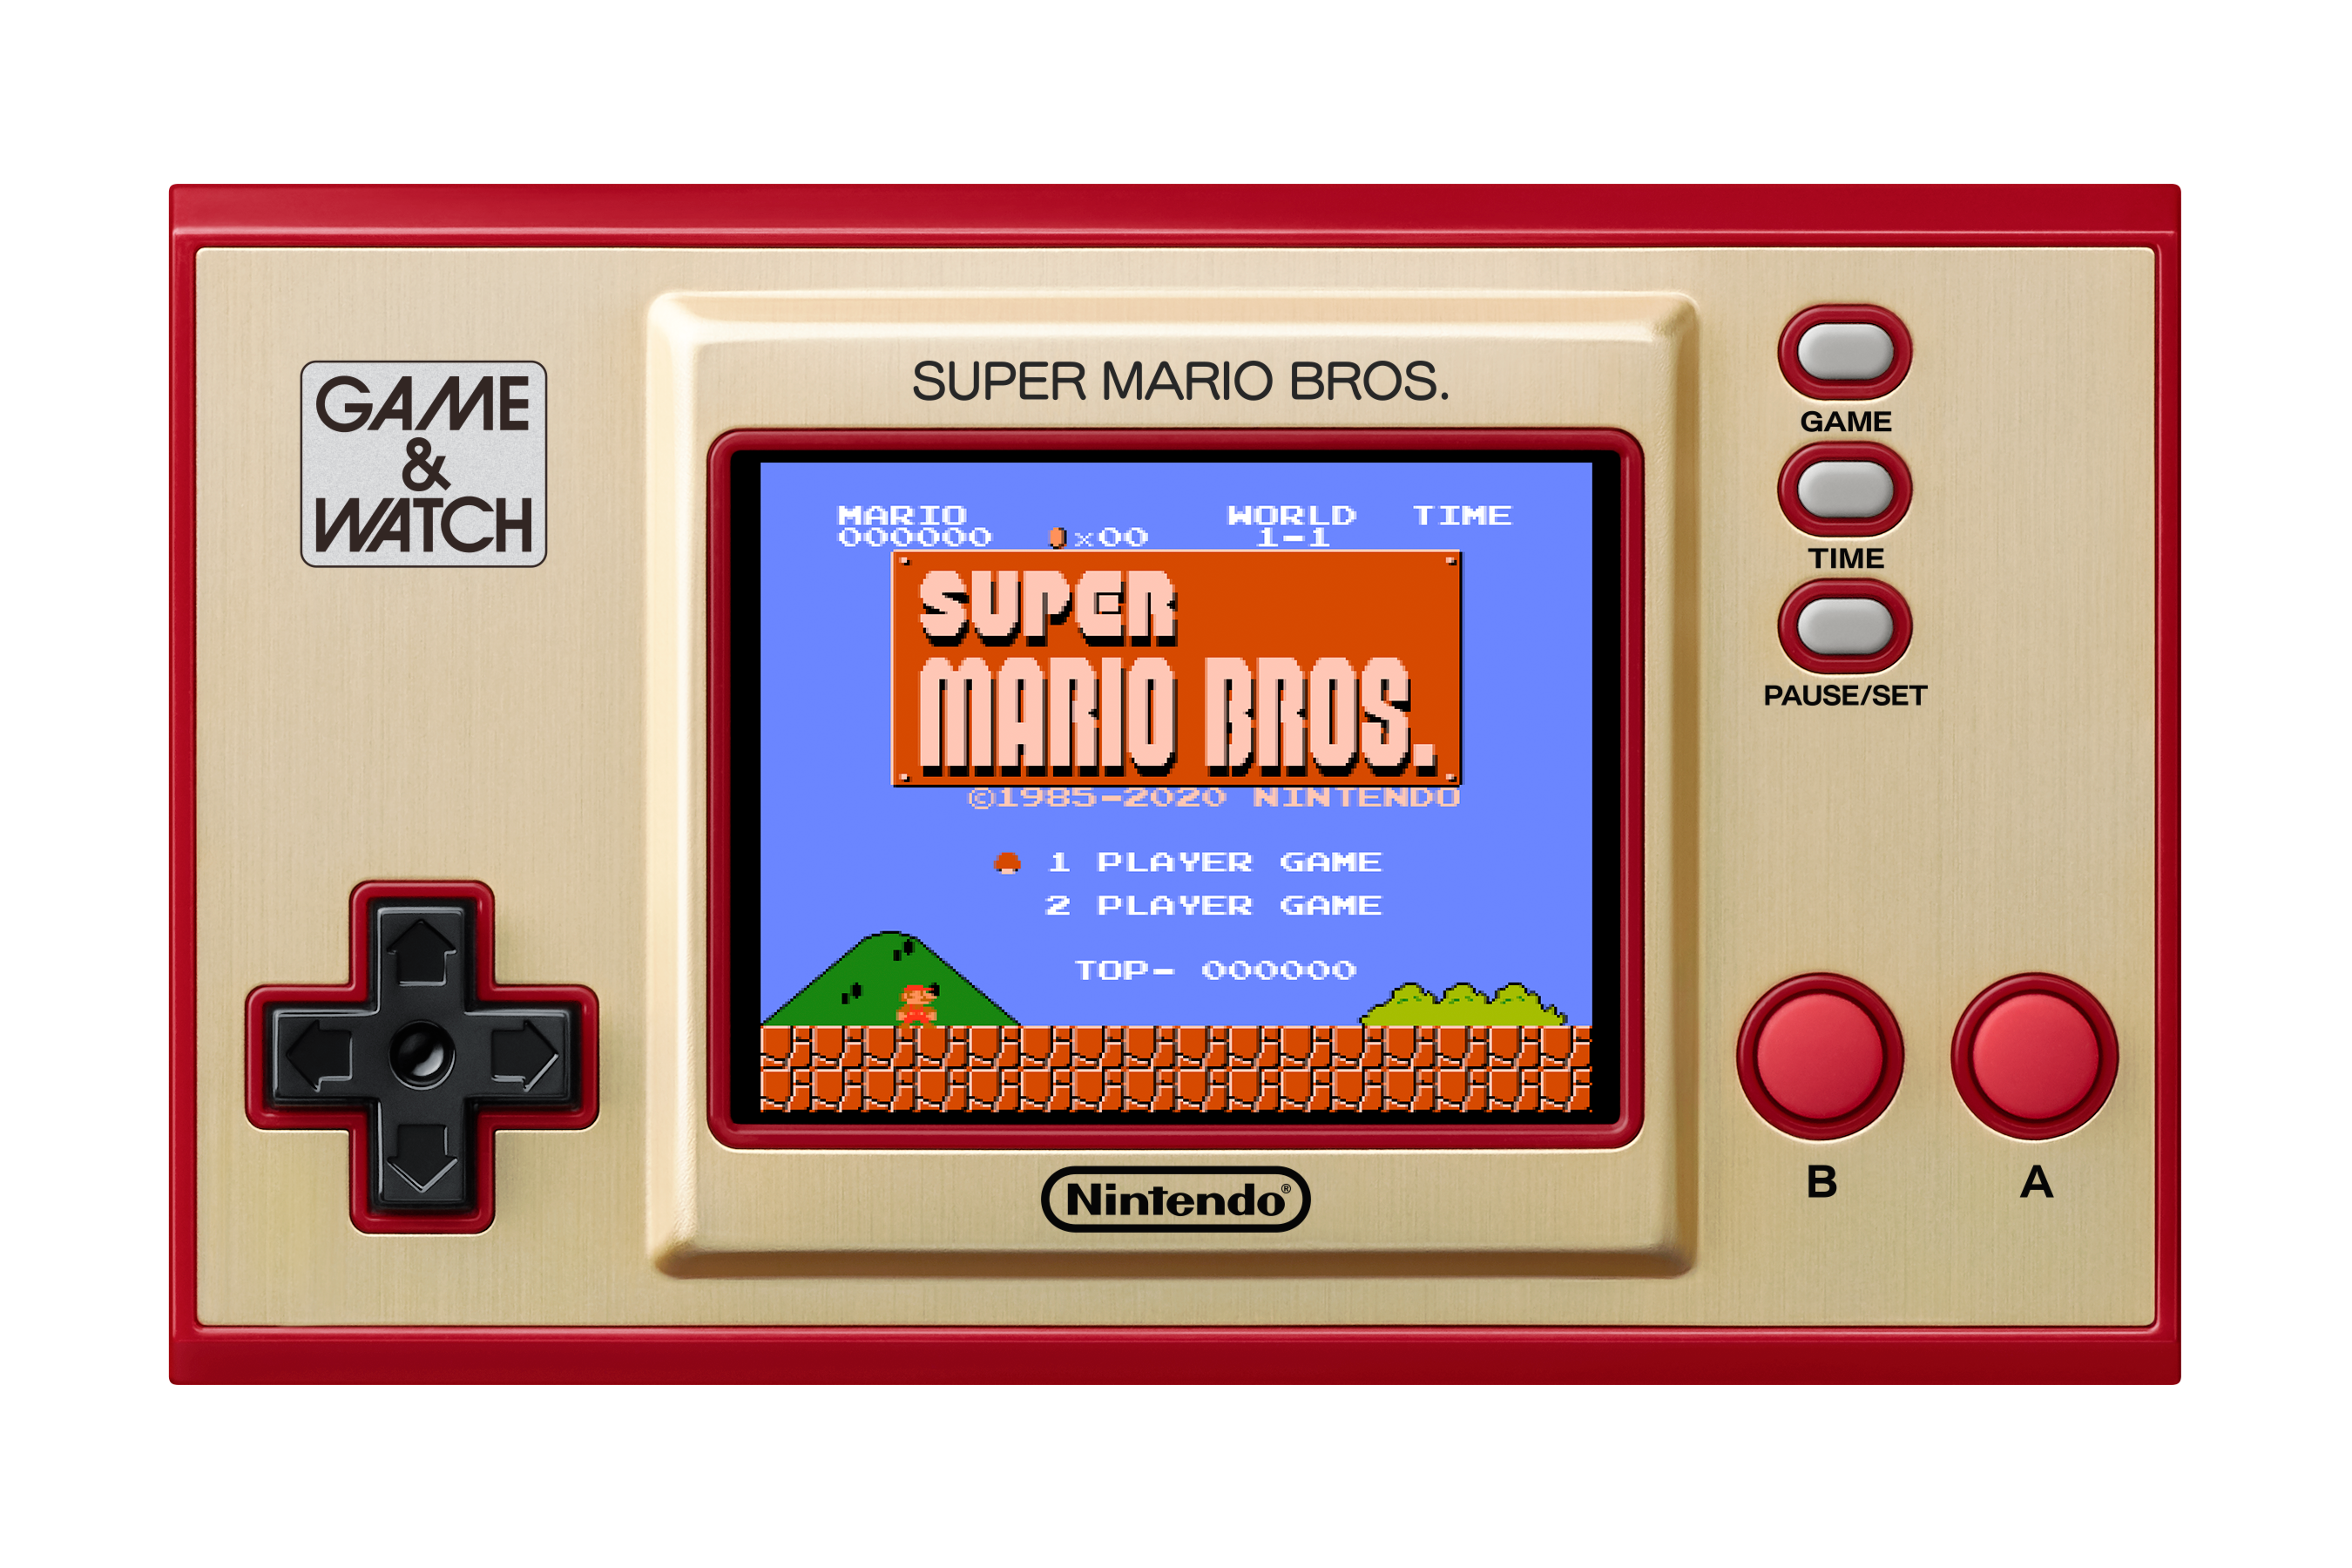 Nintendo reissues the Game & Watch with Super Mario Bros